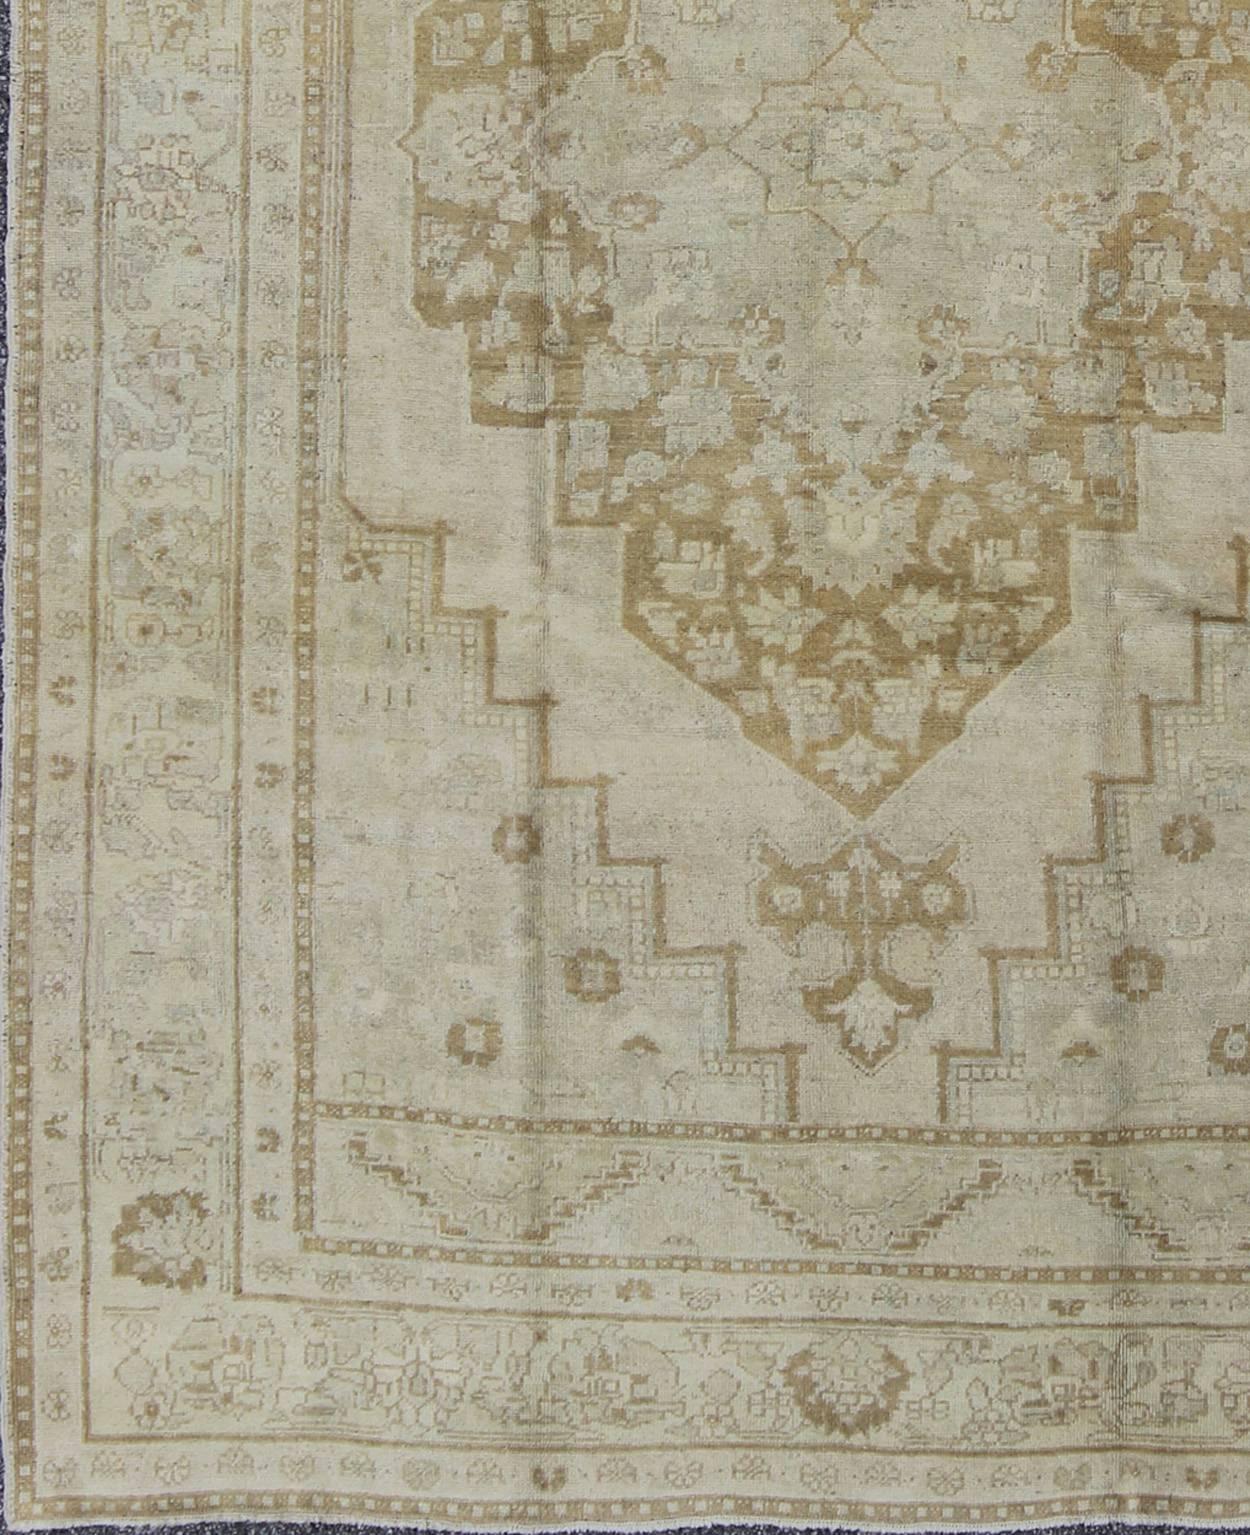 Pale Colored Vintage Turkish Oushak Rug in Gray, Taupe, Cream and Light Brown.
Oushak rugs such as this vintage piece are highly decorative and desirable for their pale colors. The subdued color palette of soft gold, light brown, green, ivory and